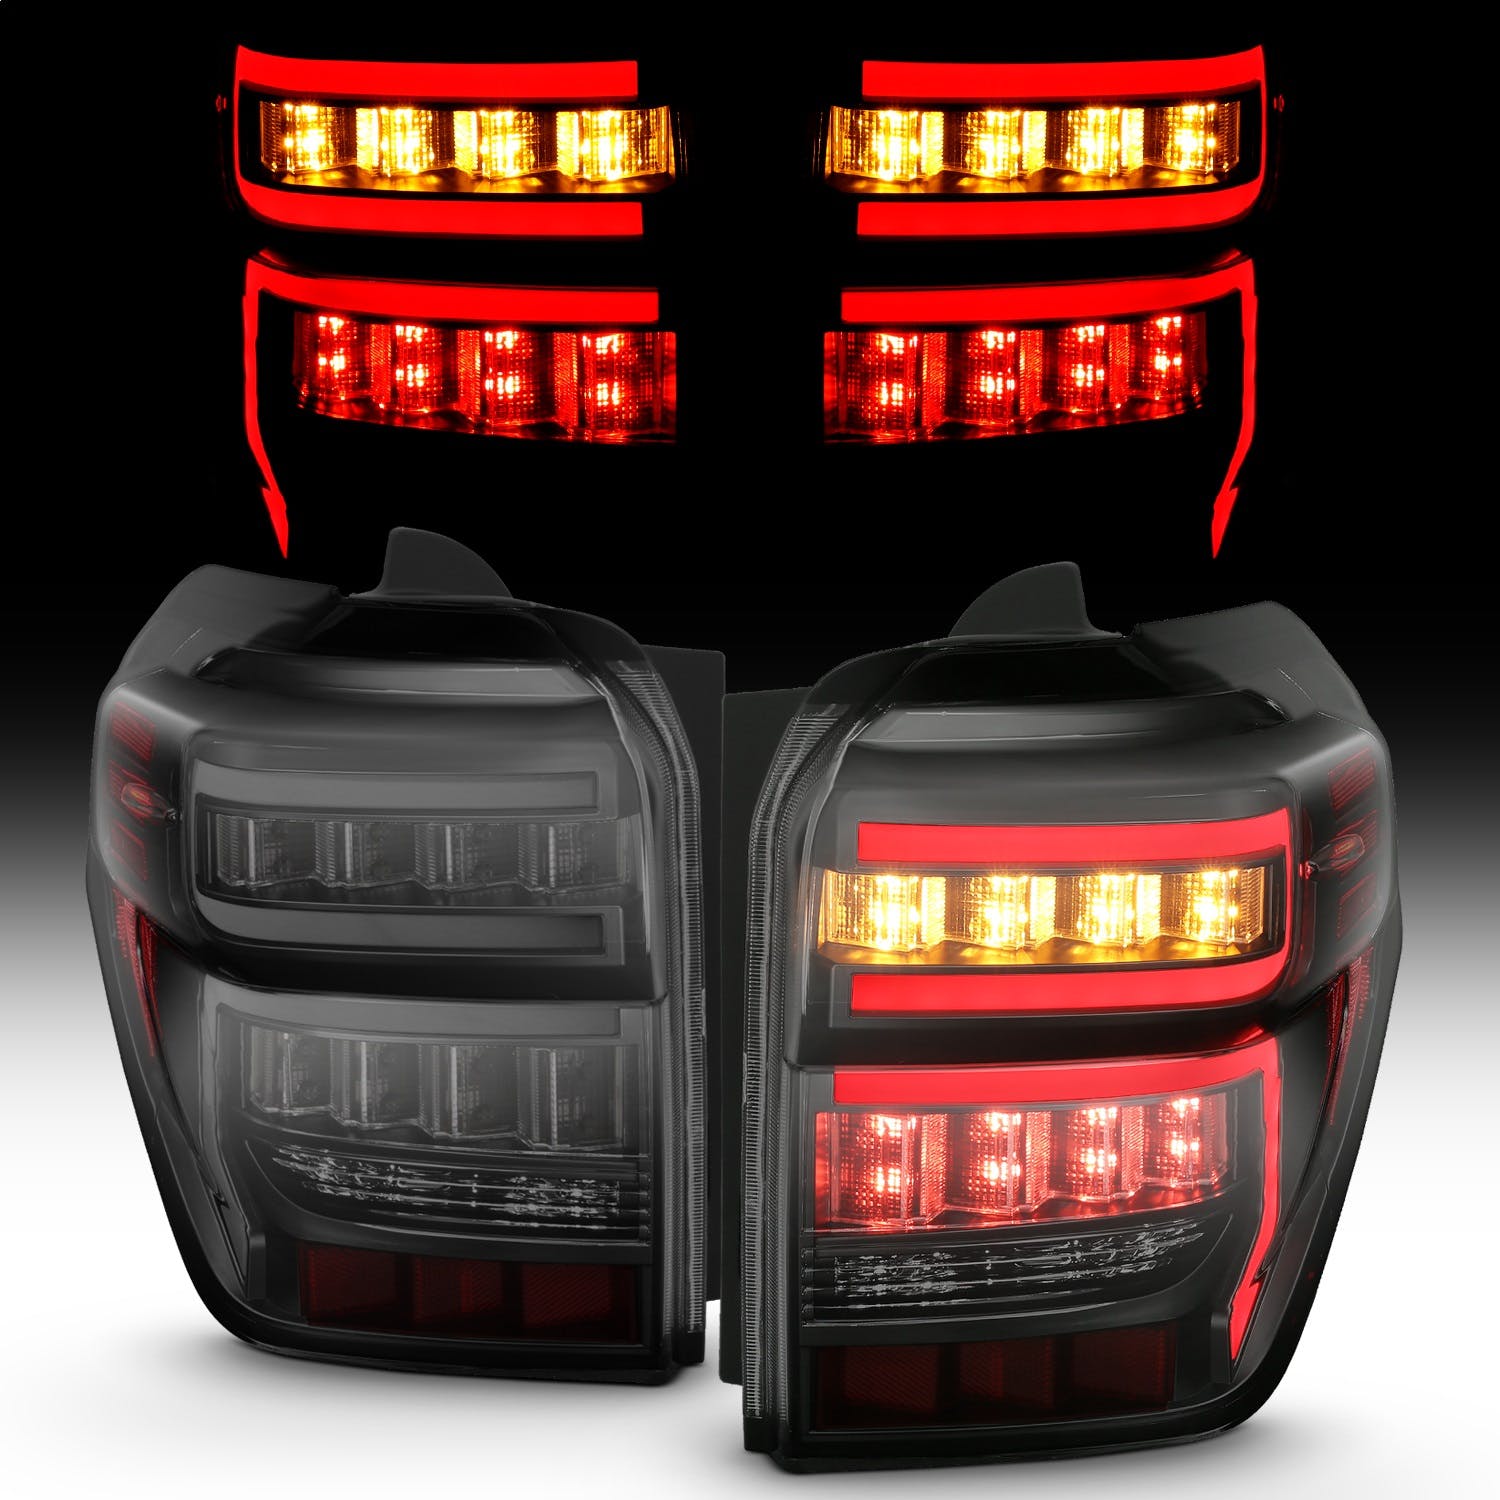 AnzoUSA 311312 Tail Lights Black Housing Smoke Lens Red Light Bar With sequential